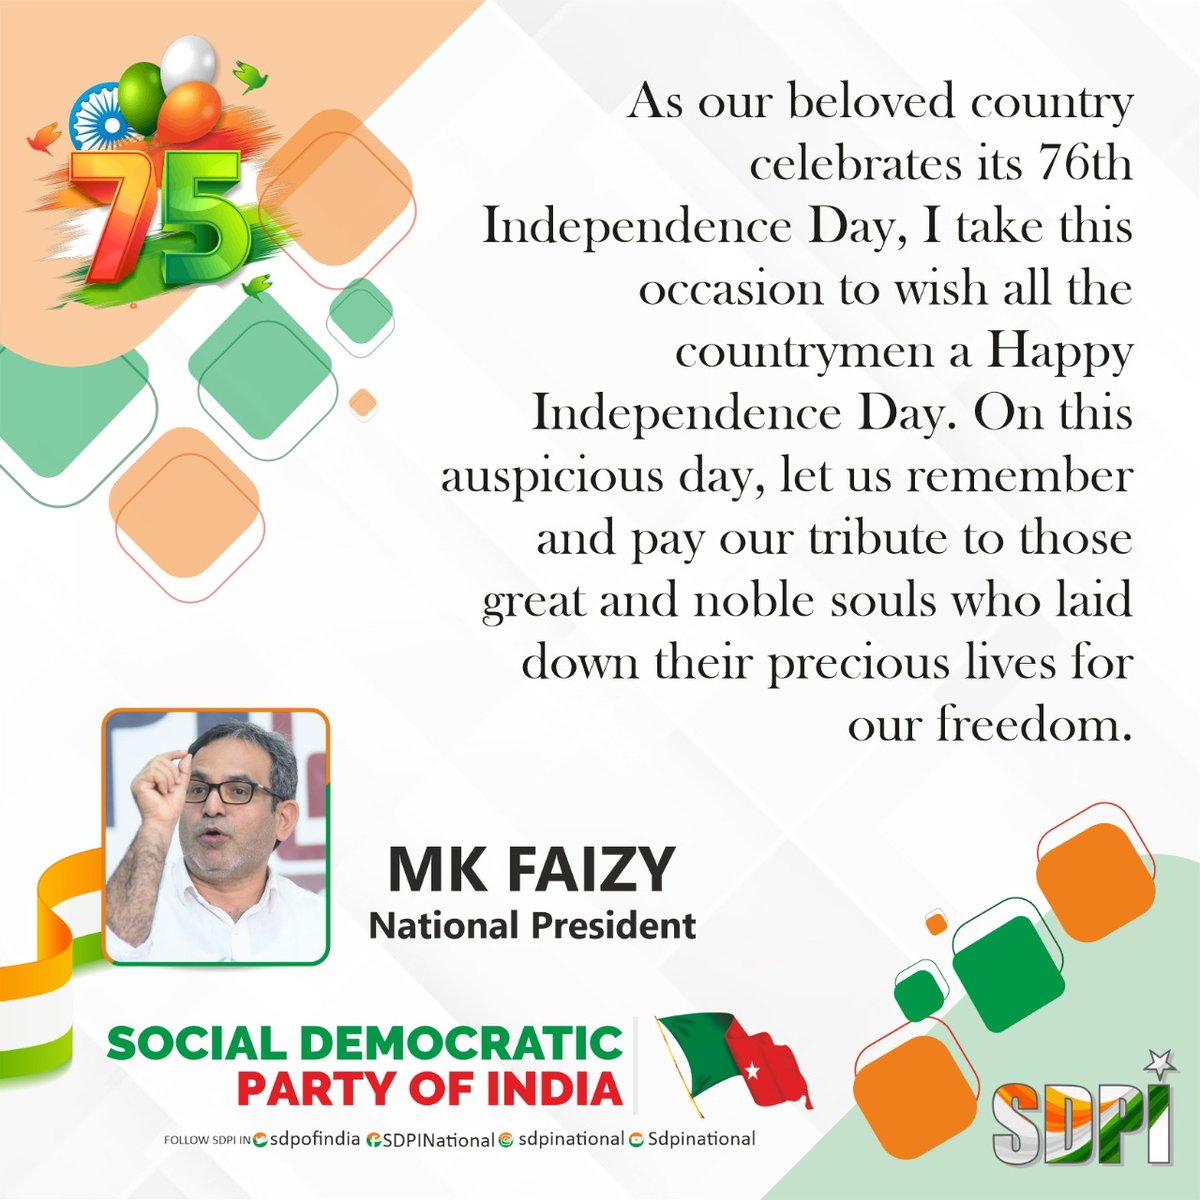 As our beloved country celebrates its 76th Independence Day, I take this occasion to wish all the countrymen a Happy Independence Day. On this auspicious day, let us remember and pay our tribute to those great and noble souls who laid down their precious lives for our freedom.